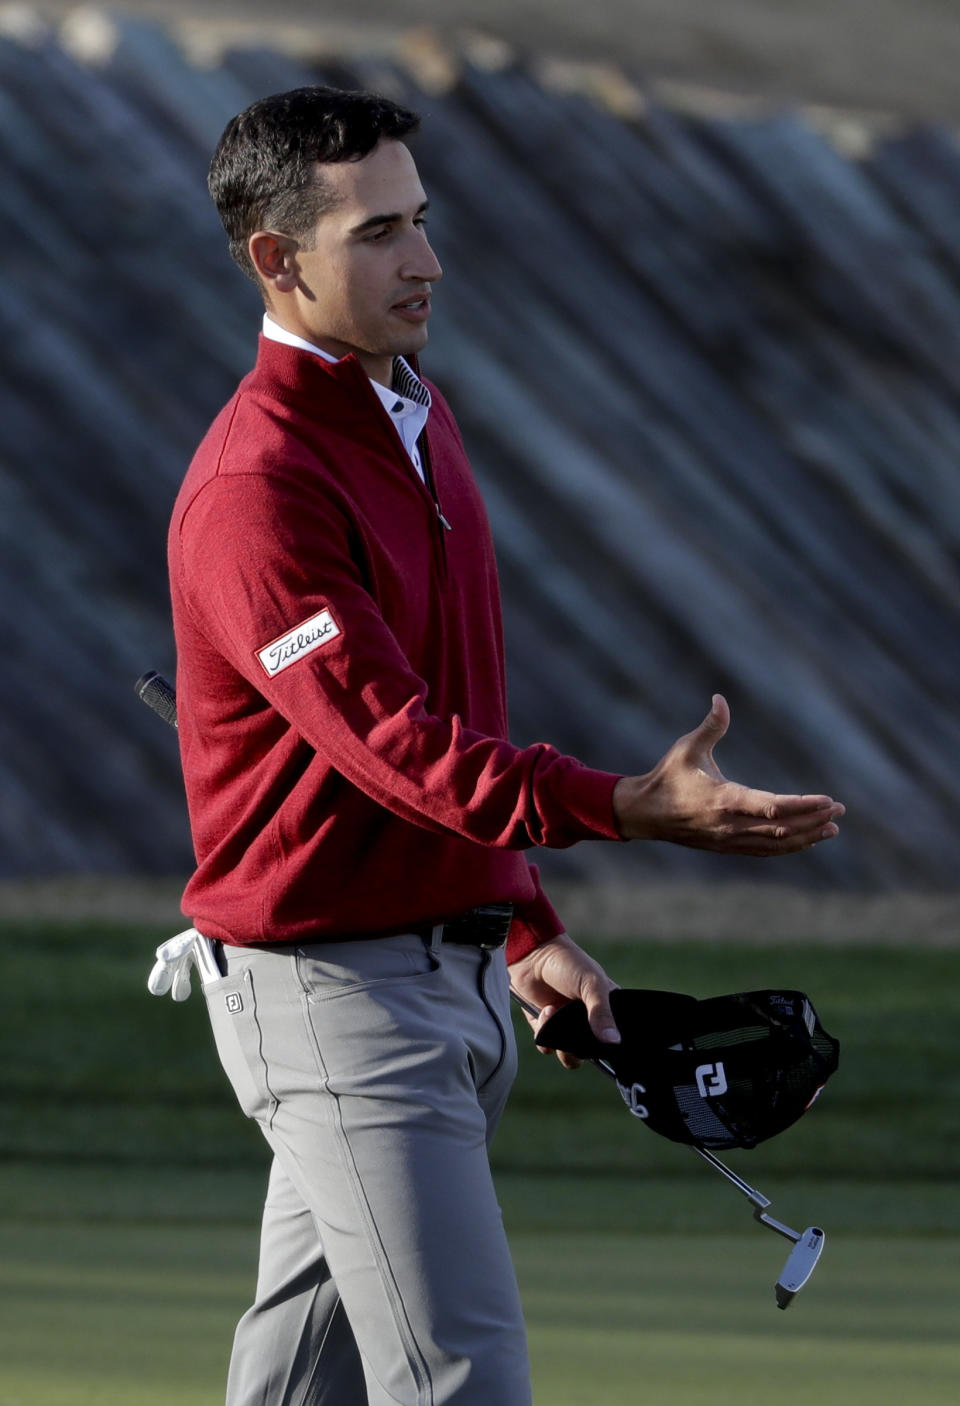 Dominic Bozzelli shakes hands on the ninth green after posting an 8-under par first round in the CareerBuilder Challenge golf tournament at the Stadium Course at PGA West on Thursday, Jan. 19, 2017, in La Quinta, Calif. (AP Photo/Chris Carlson)